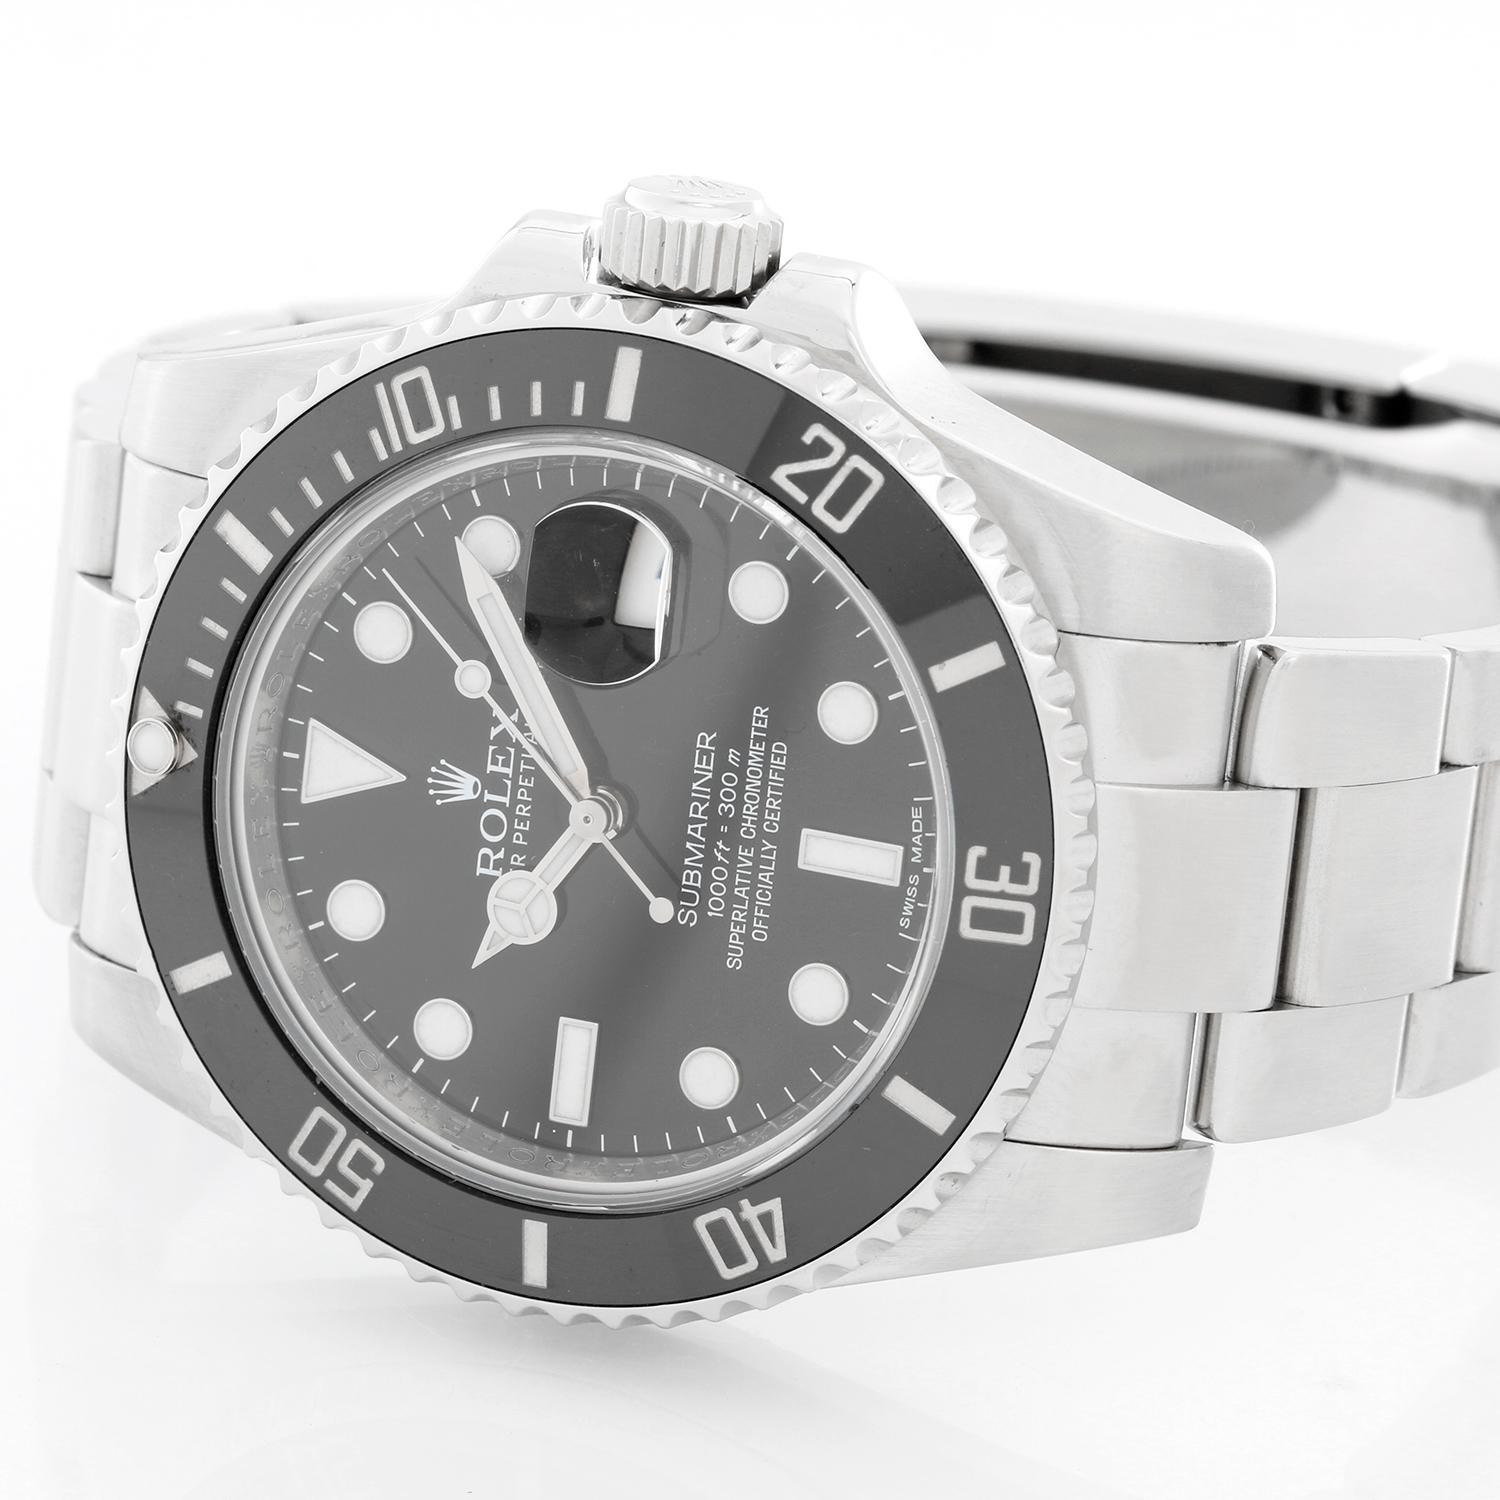 Rolex Submariner Men's Stainless Steel Watch 116610 - Automatic winding, 31 jewels, pressure proof to 1,000 feet. Stainless steel case with time-lapse Cerachrom bezel . Black dial with luminous markers; date at 3 o'clock. Stainless steel and Oyster